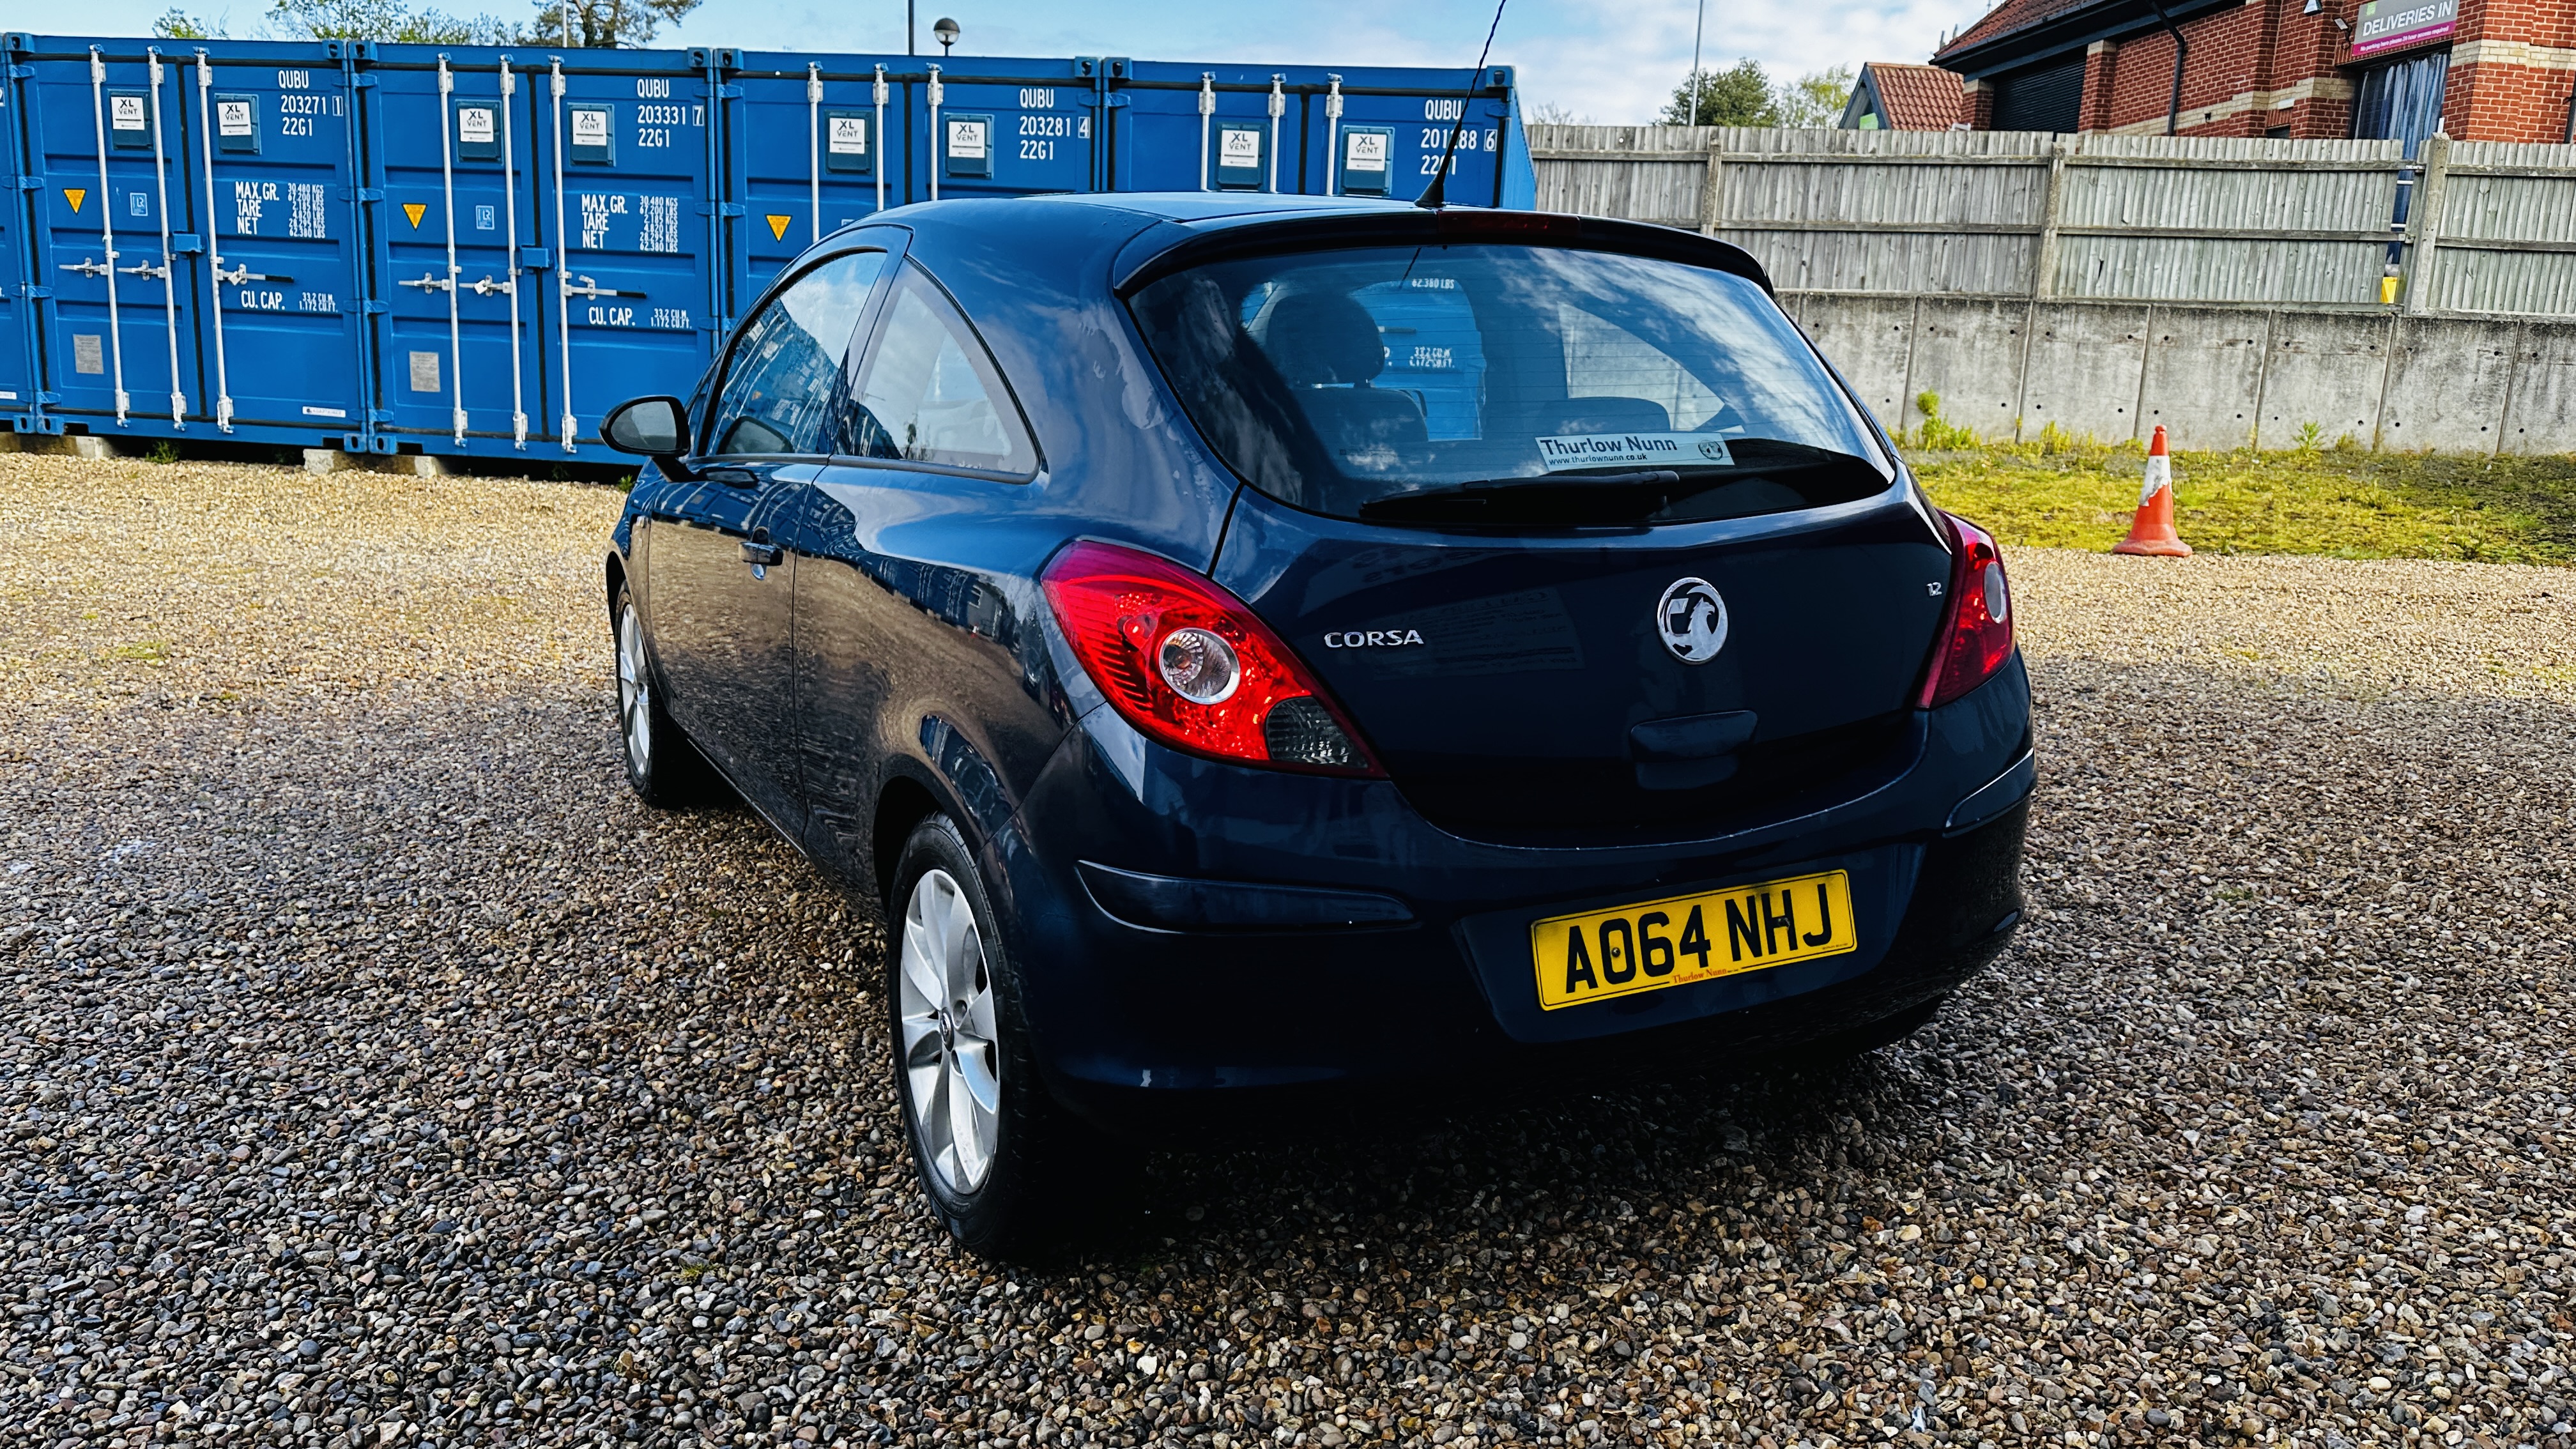 2014 VAUXHALL CORSA EXCITE AC. VRM: A064 NHJ. FIRST REGISTERED: 26/11/2014. 1229CC PETROL. - Image 7 of 19